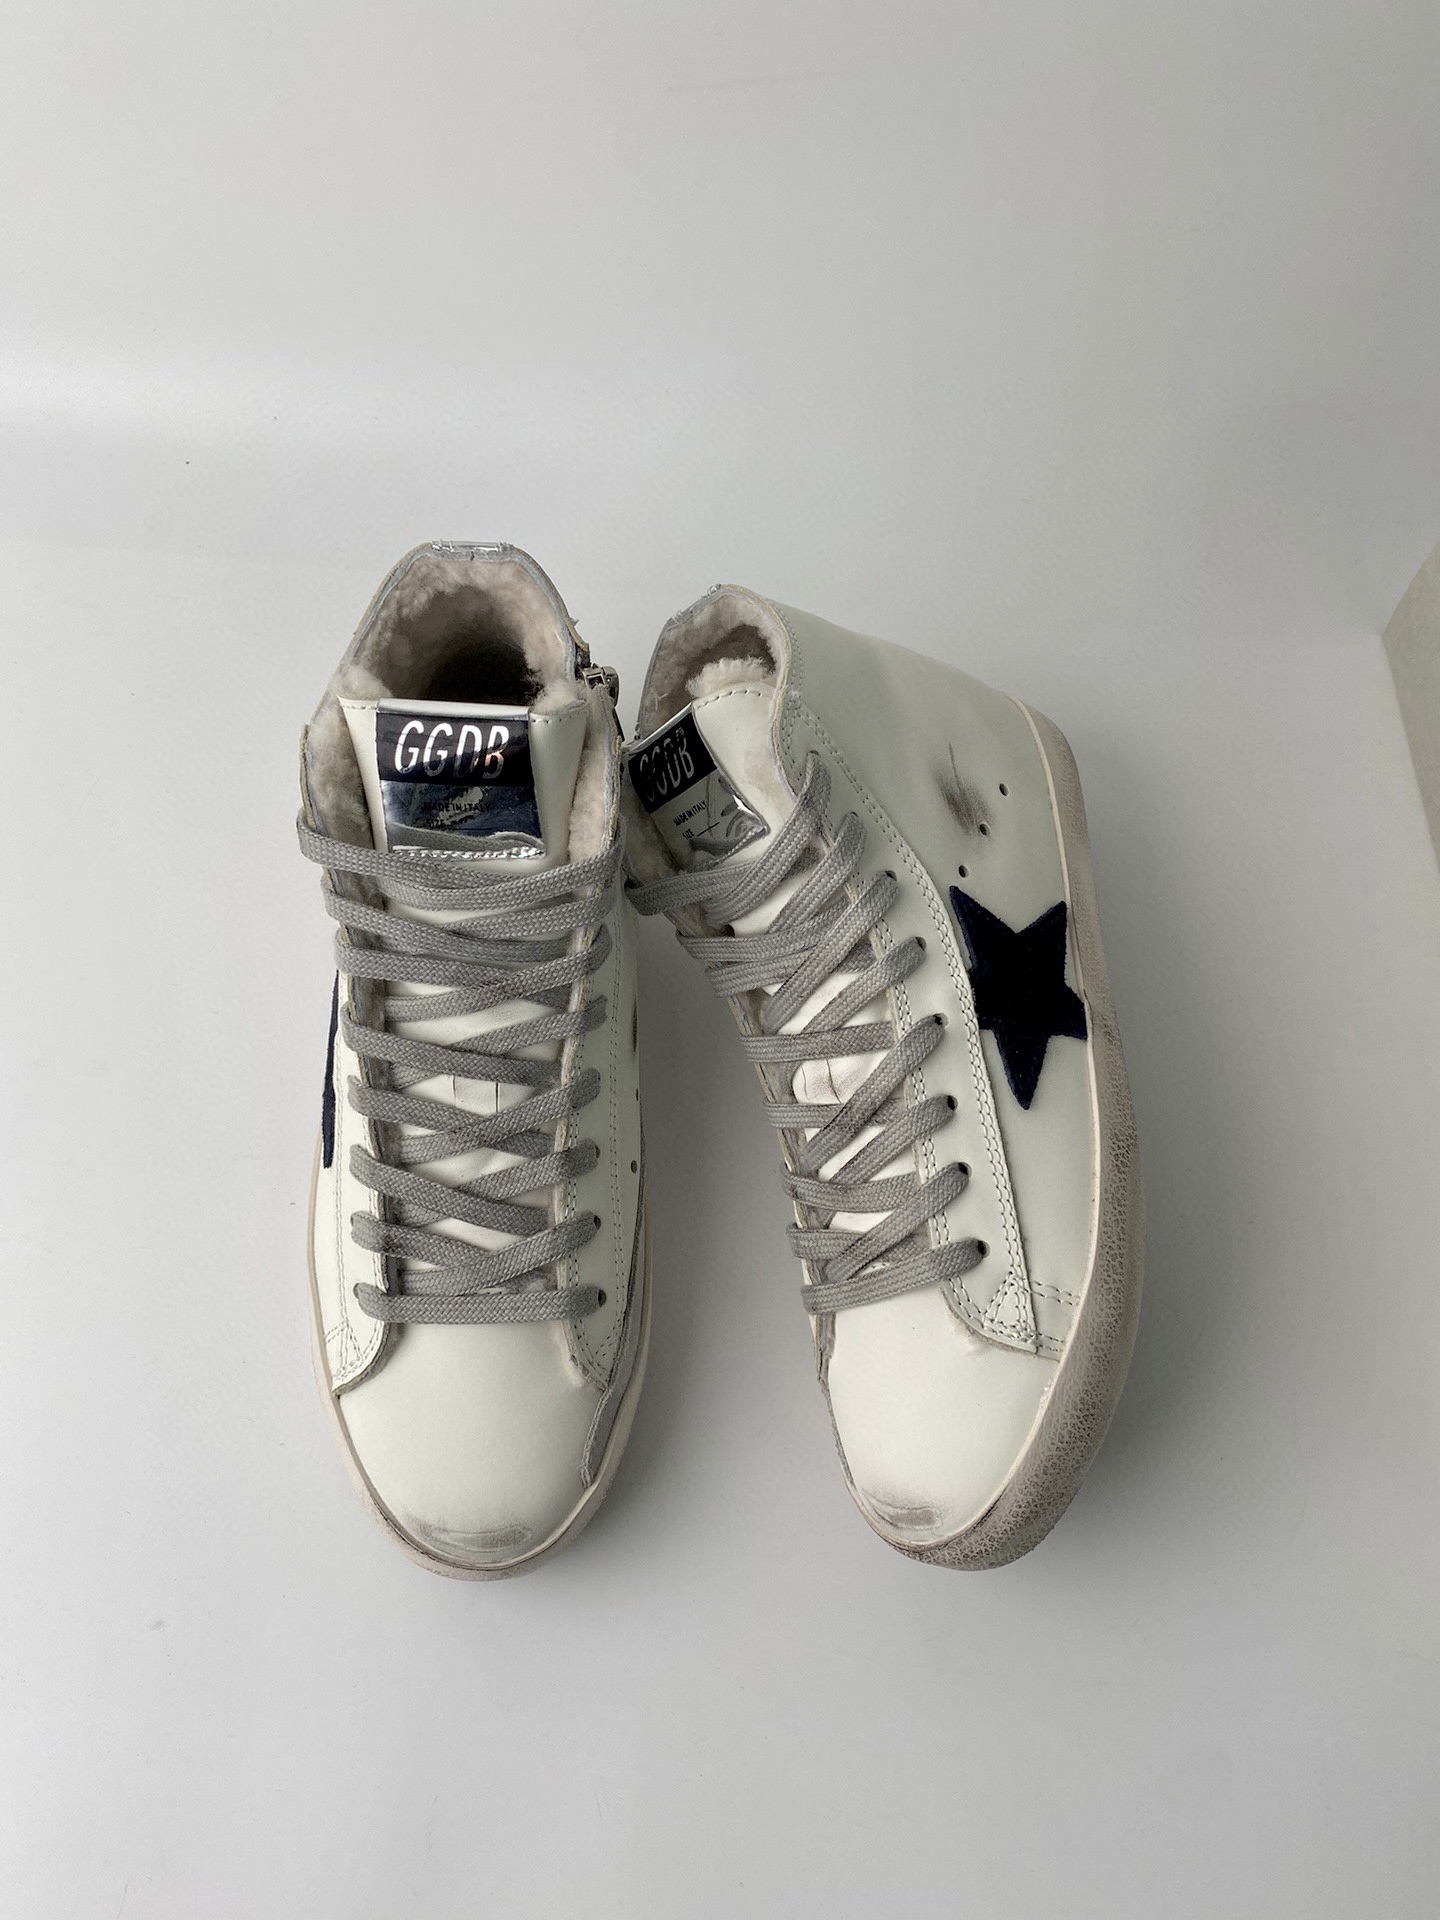 Golden Goose Francy in white suede with black leather star Fleece Lined Sneaker Unisex # 274271, cheap Golden Goose Sneaker, only $95!